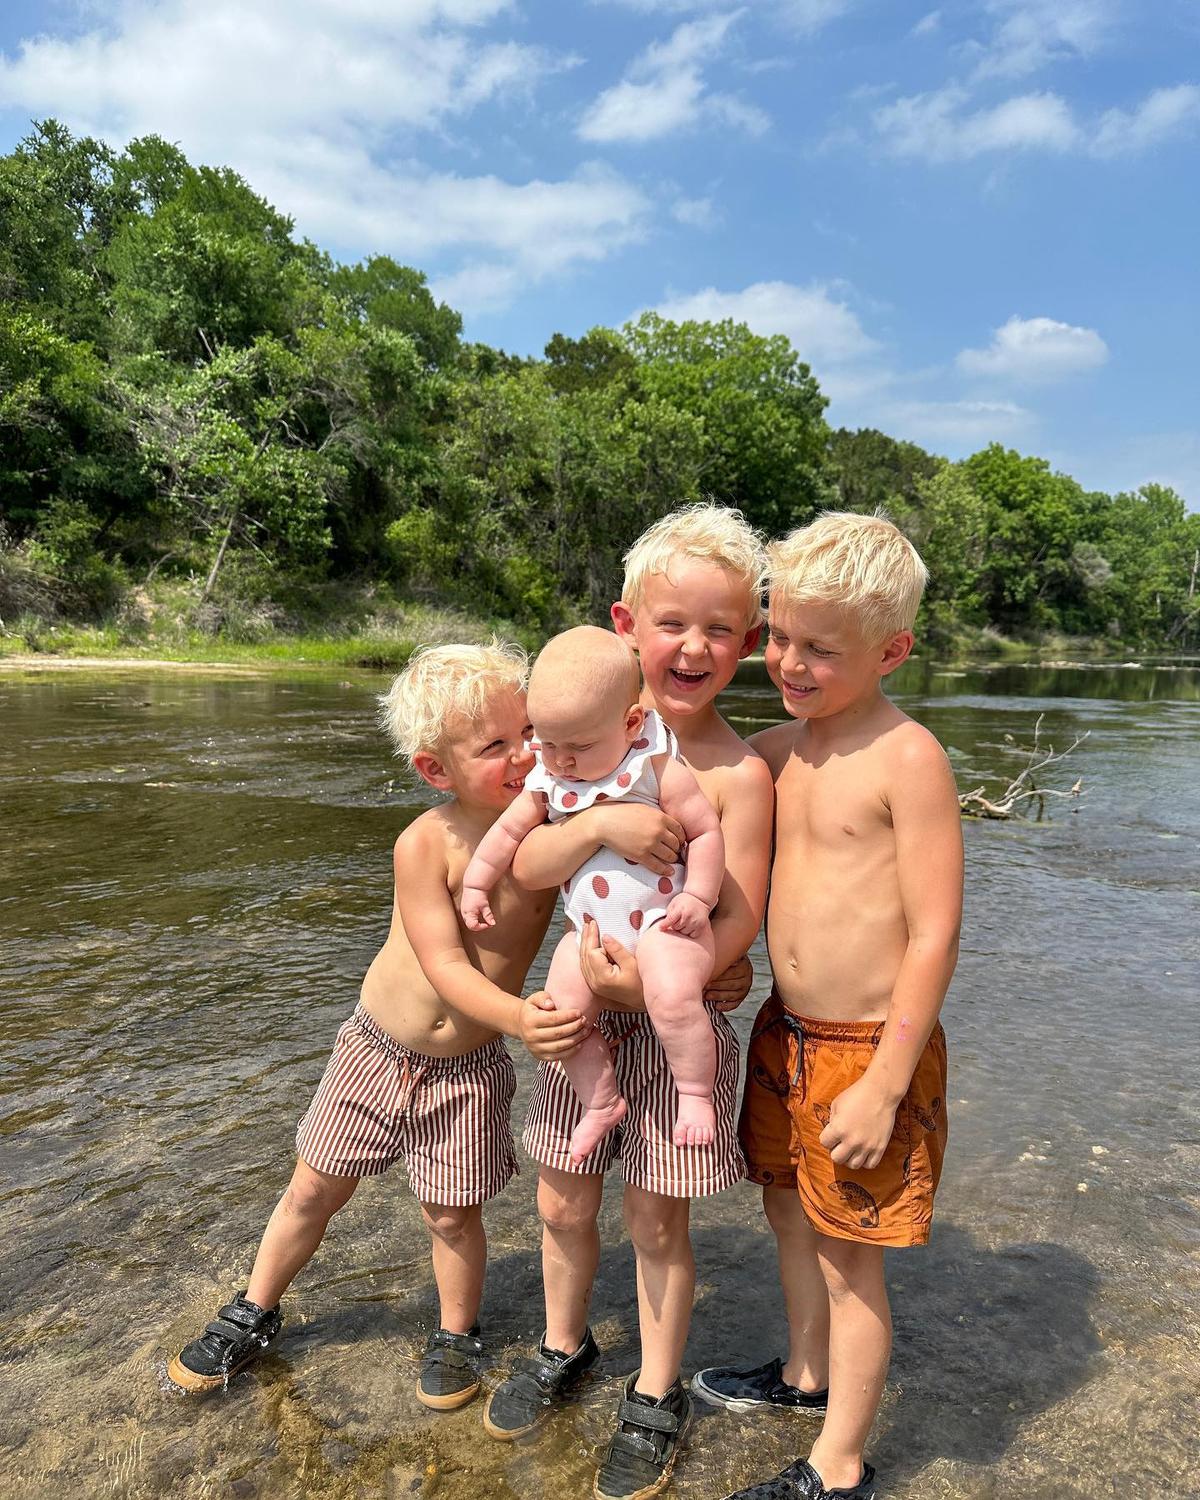  The Powell siblings: Dax, 7, Jet, 5, Kai, 4, and baby Oaklyn, 6 months. (Courtesy of <a href="https://www.instagram.com/thepastelfox/">Brooklyn Powell</a>)